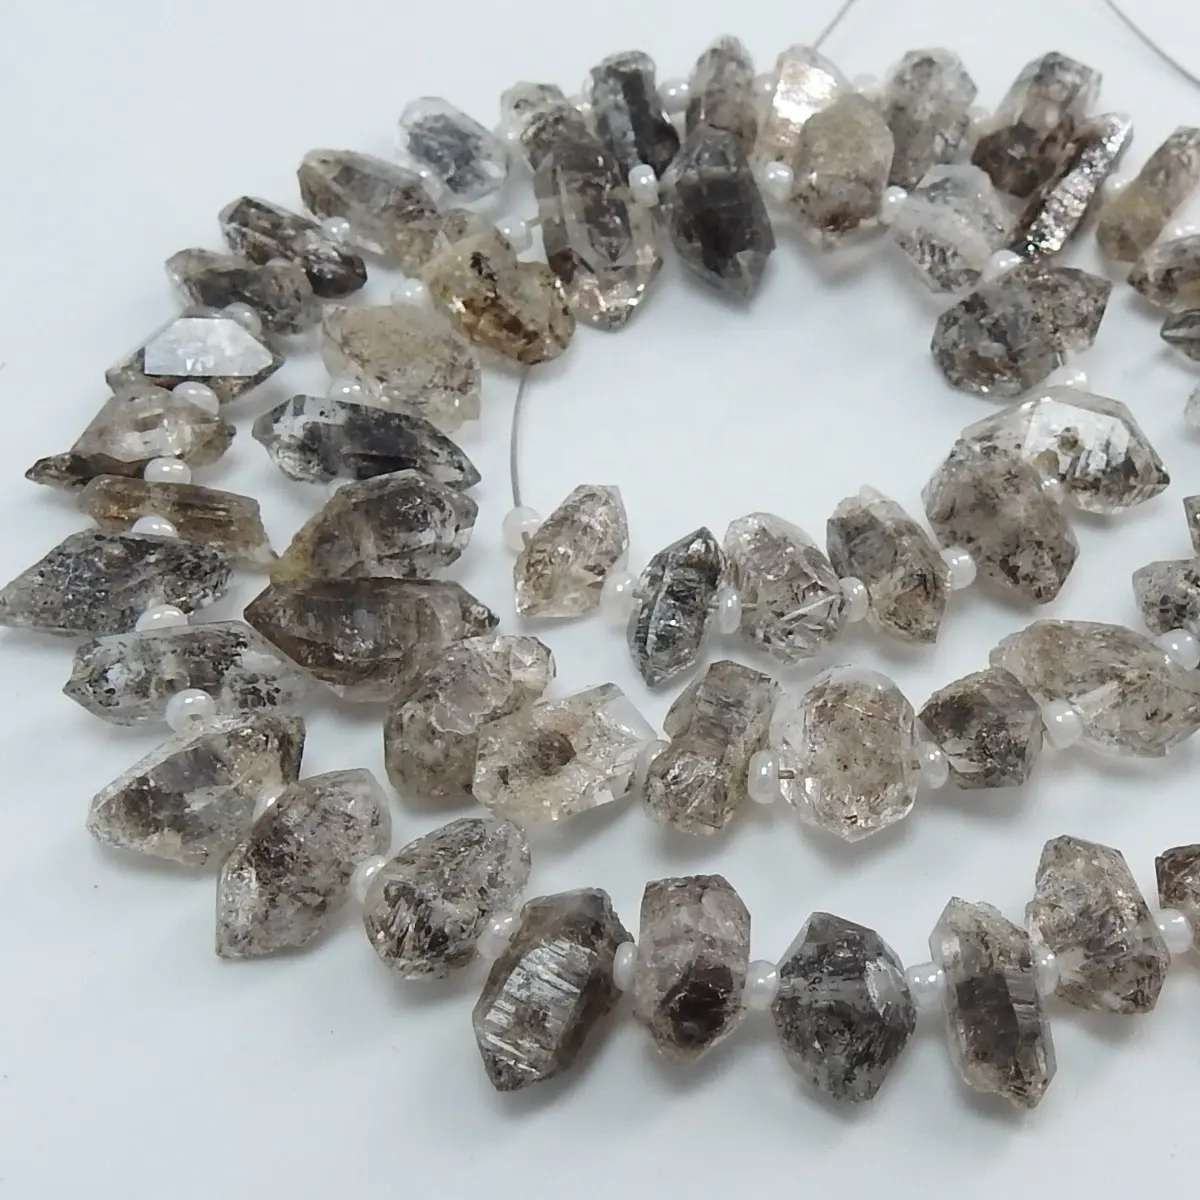 Herkimer Diamond Quartz Natural Rough Crystal Stick,Healing Point,Chips,Uncut,Nuggets,16Inch 12X6To10X7MM Approx,Wholesale Price